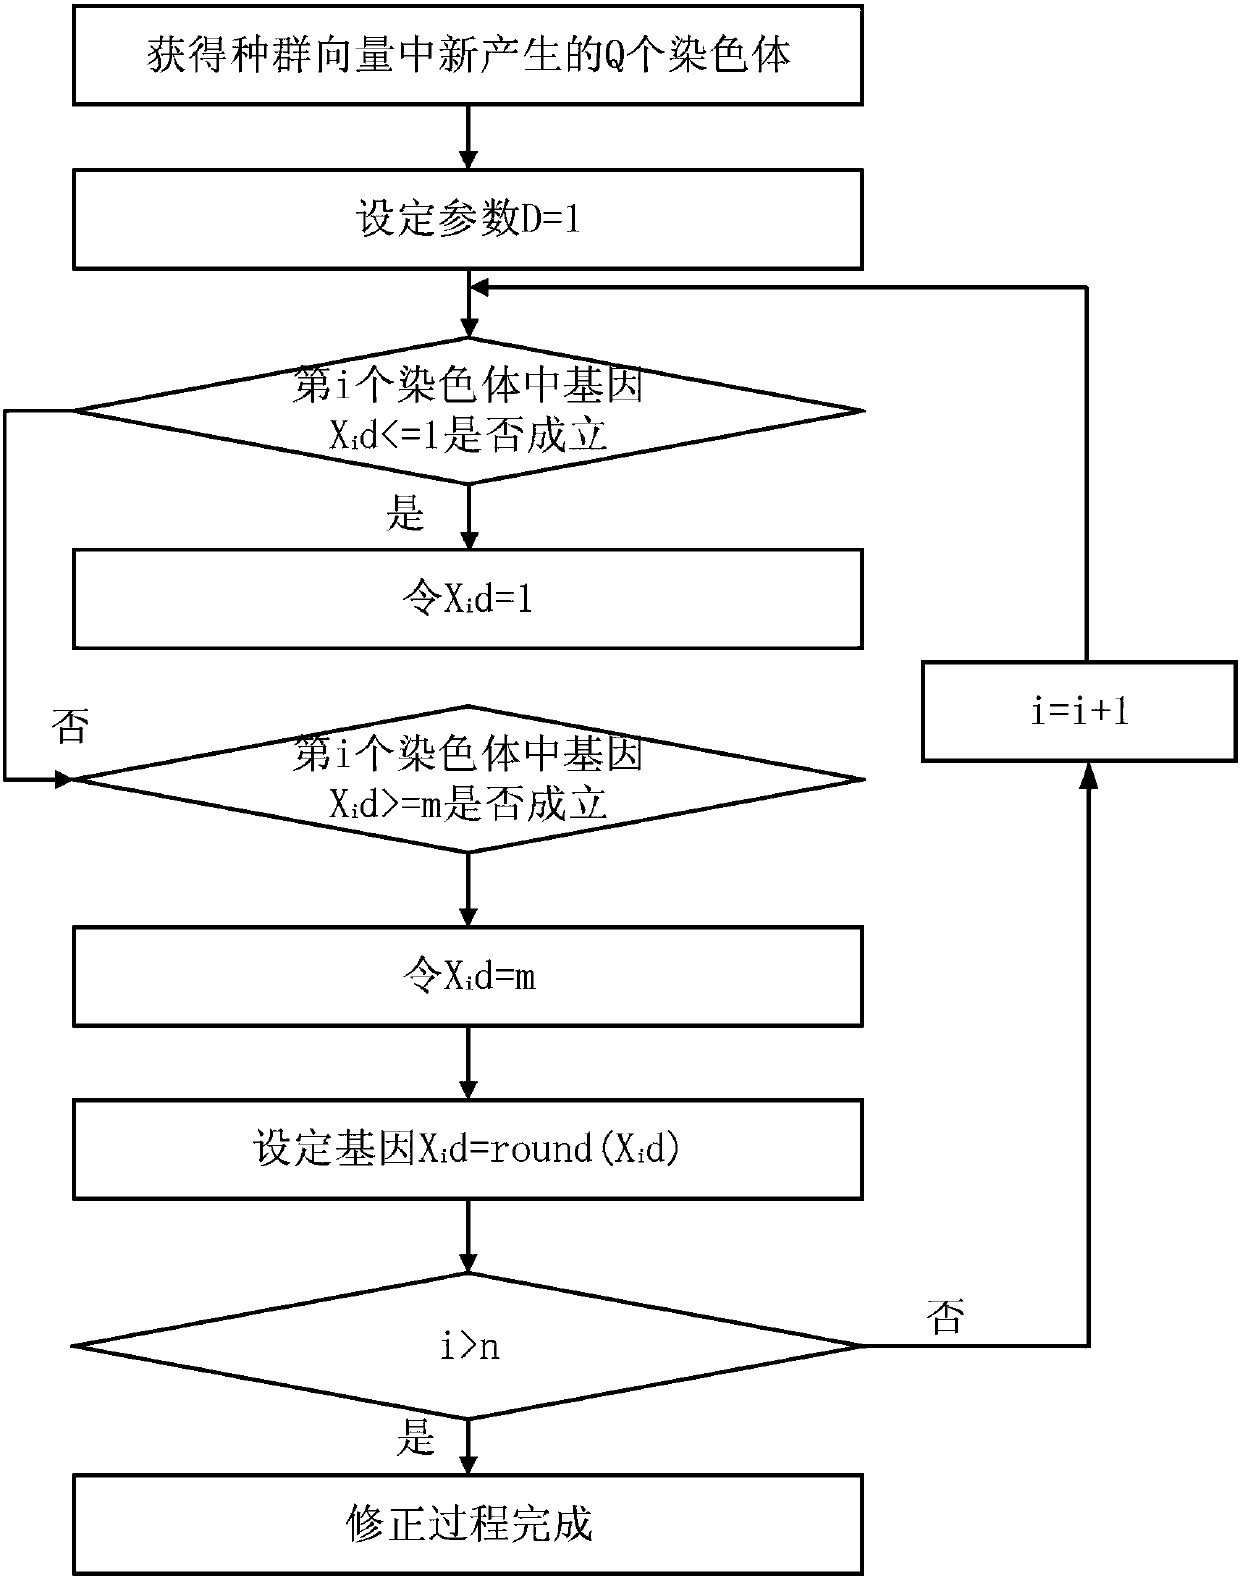 Collaborative scheduling method of high-end equipment manufacturing process, based on hybrid differential genetic algorithm